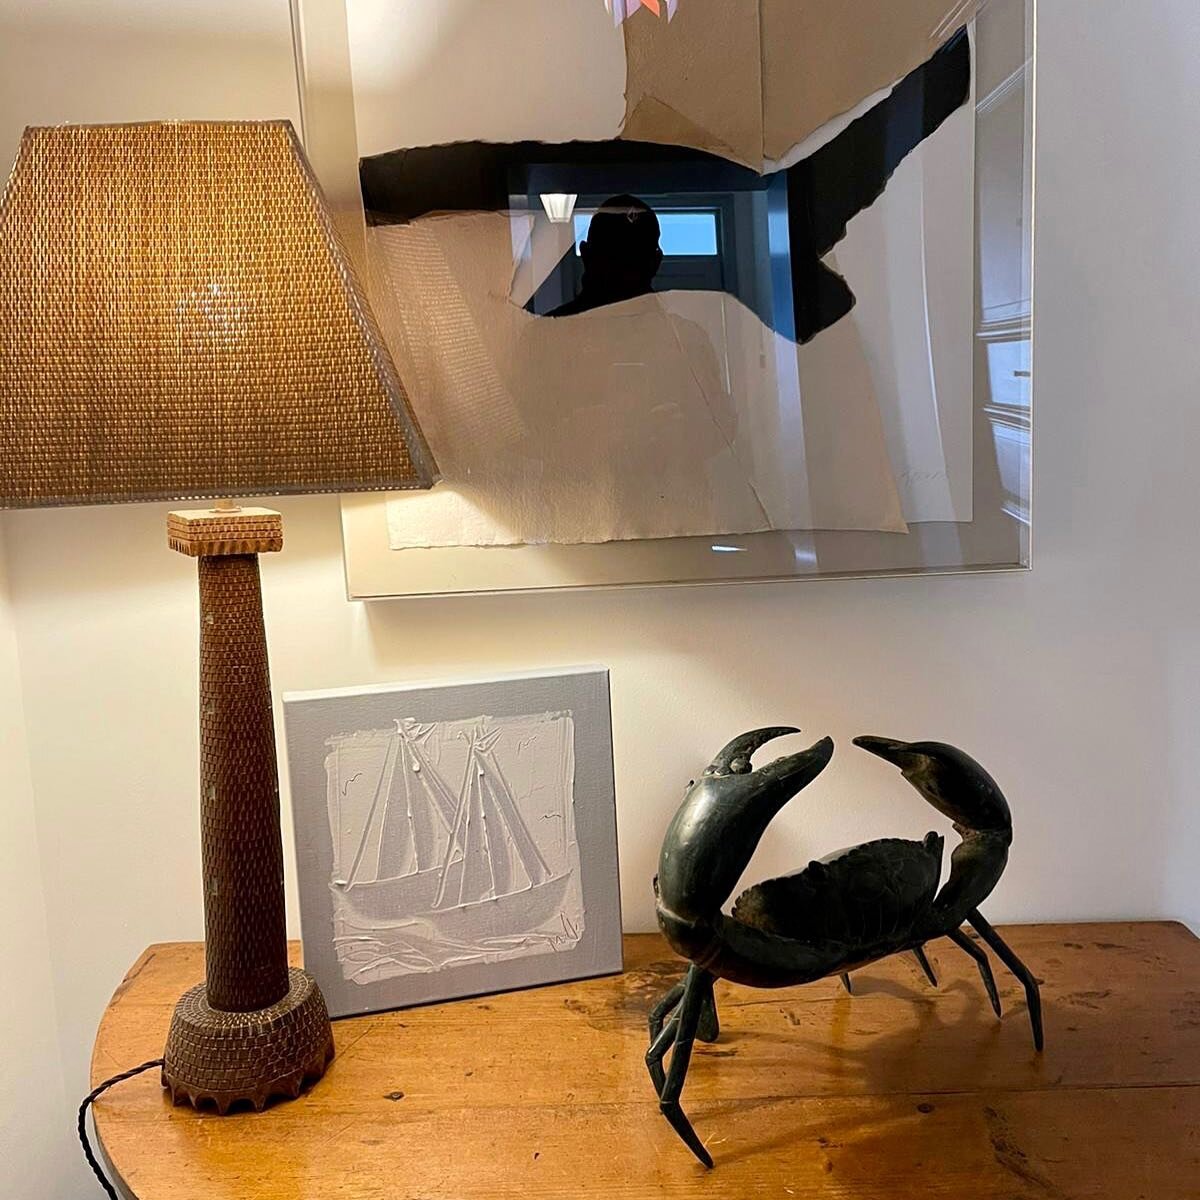 One of my original paintings sitting alongside a Dempsey Sculpture. 

Bronze Crab at The Tresanton Hotel in St Mawes, Cornwall. Thank you

#art #painting #cornwall #design #create @dempseysculptures @hoteltresanton @martyndempseyofficial